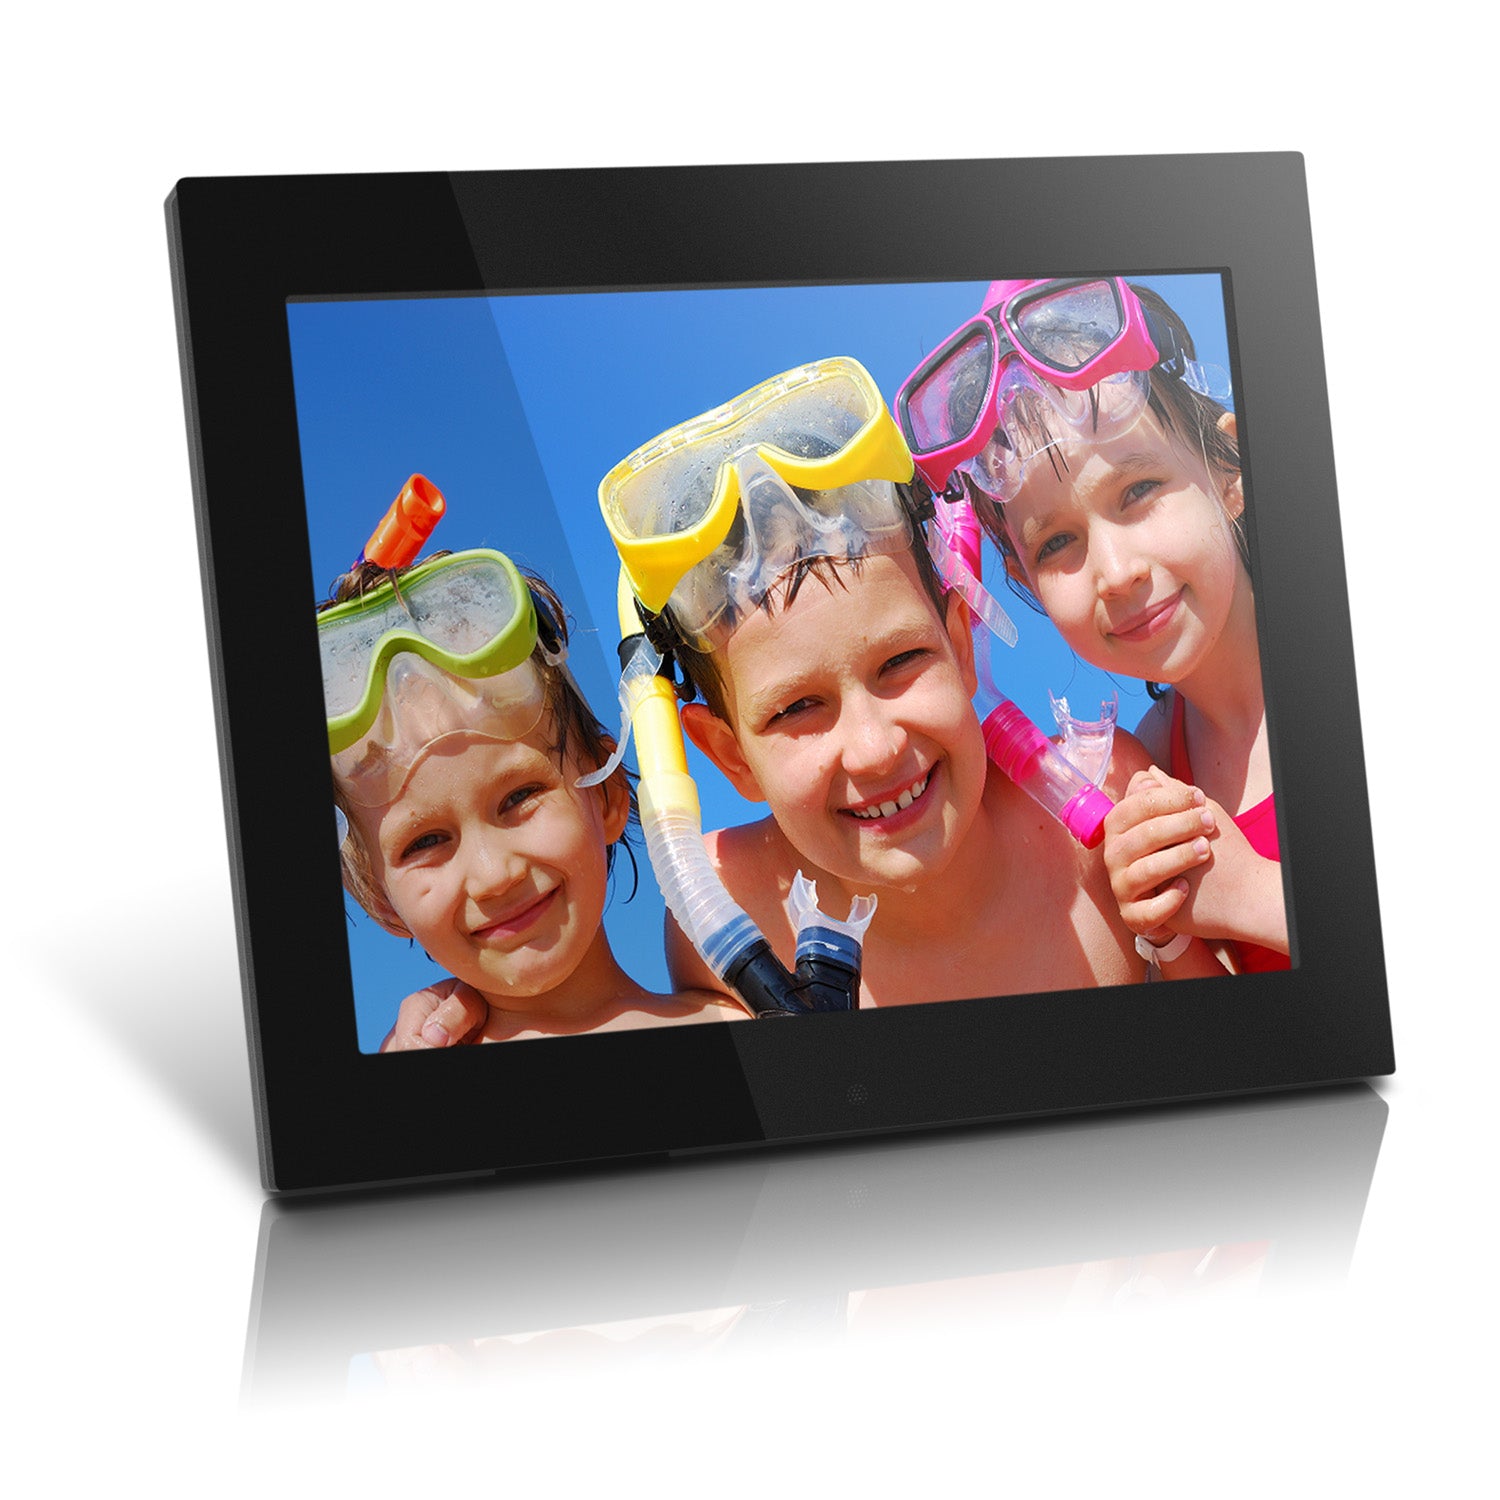 Digital Photo Frame with 4 GB Built-in Memory - 15 inch